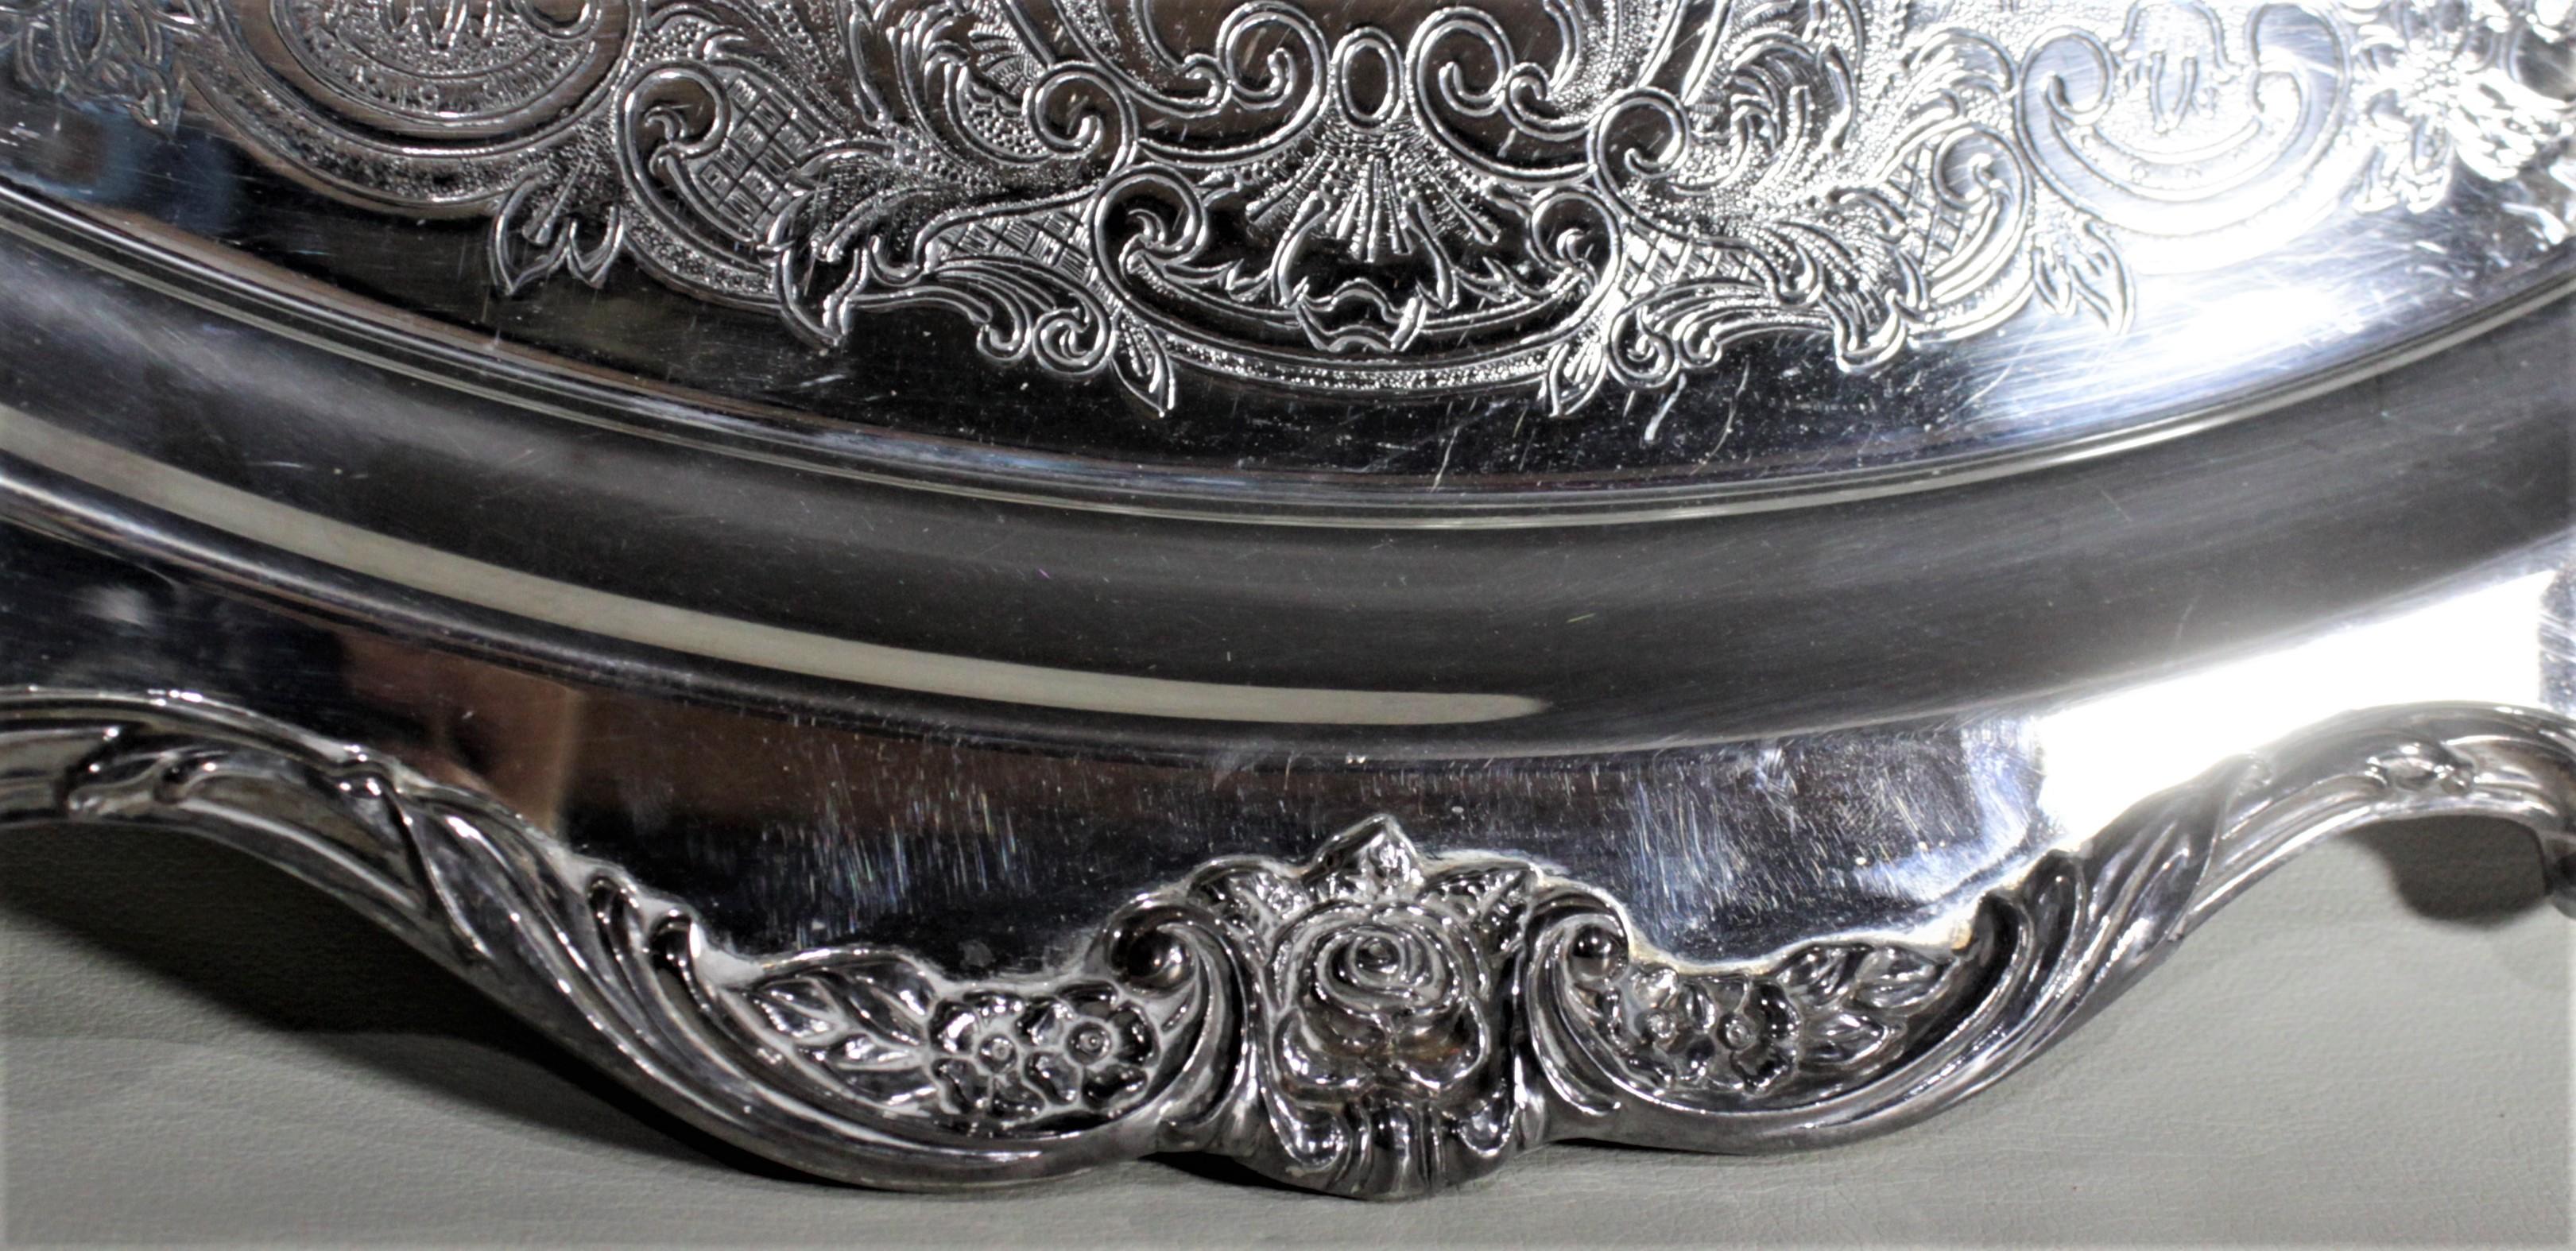 American Antique Wallace Silver Plated Oval Serving Tray with Floral Decoration For Sale